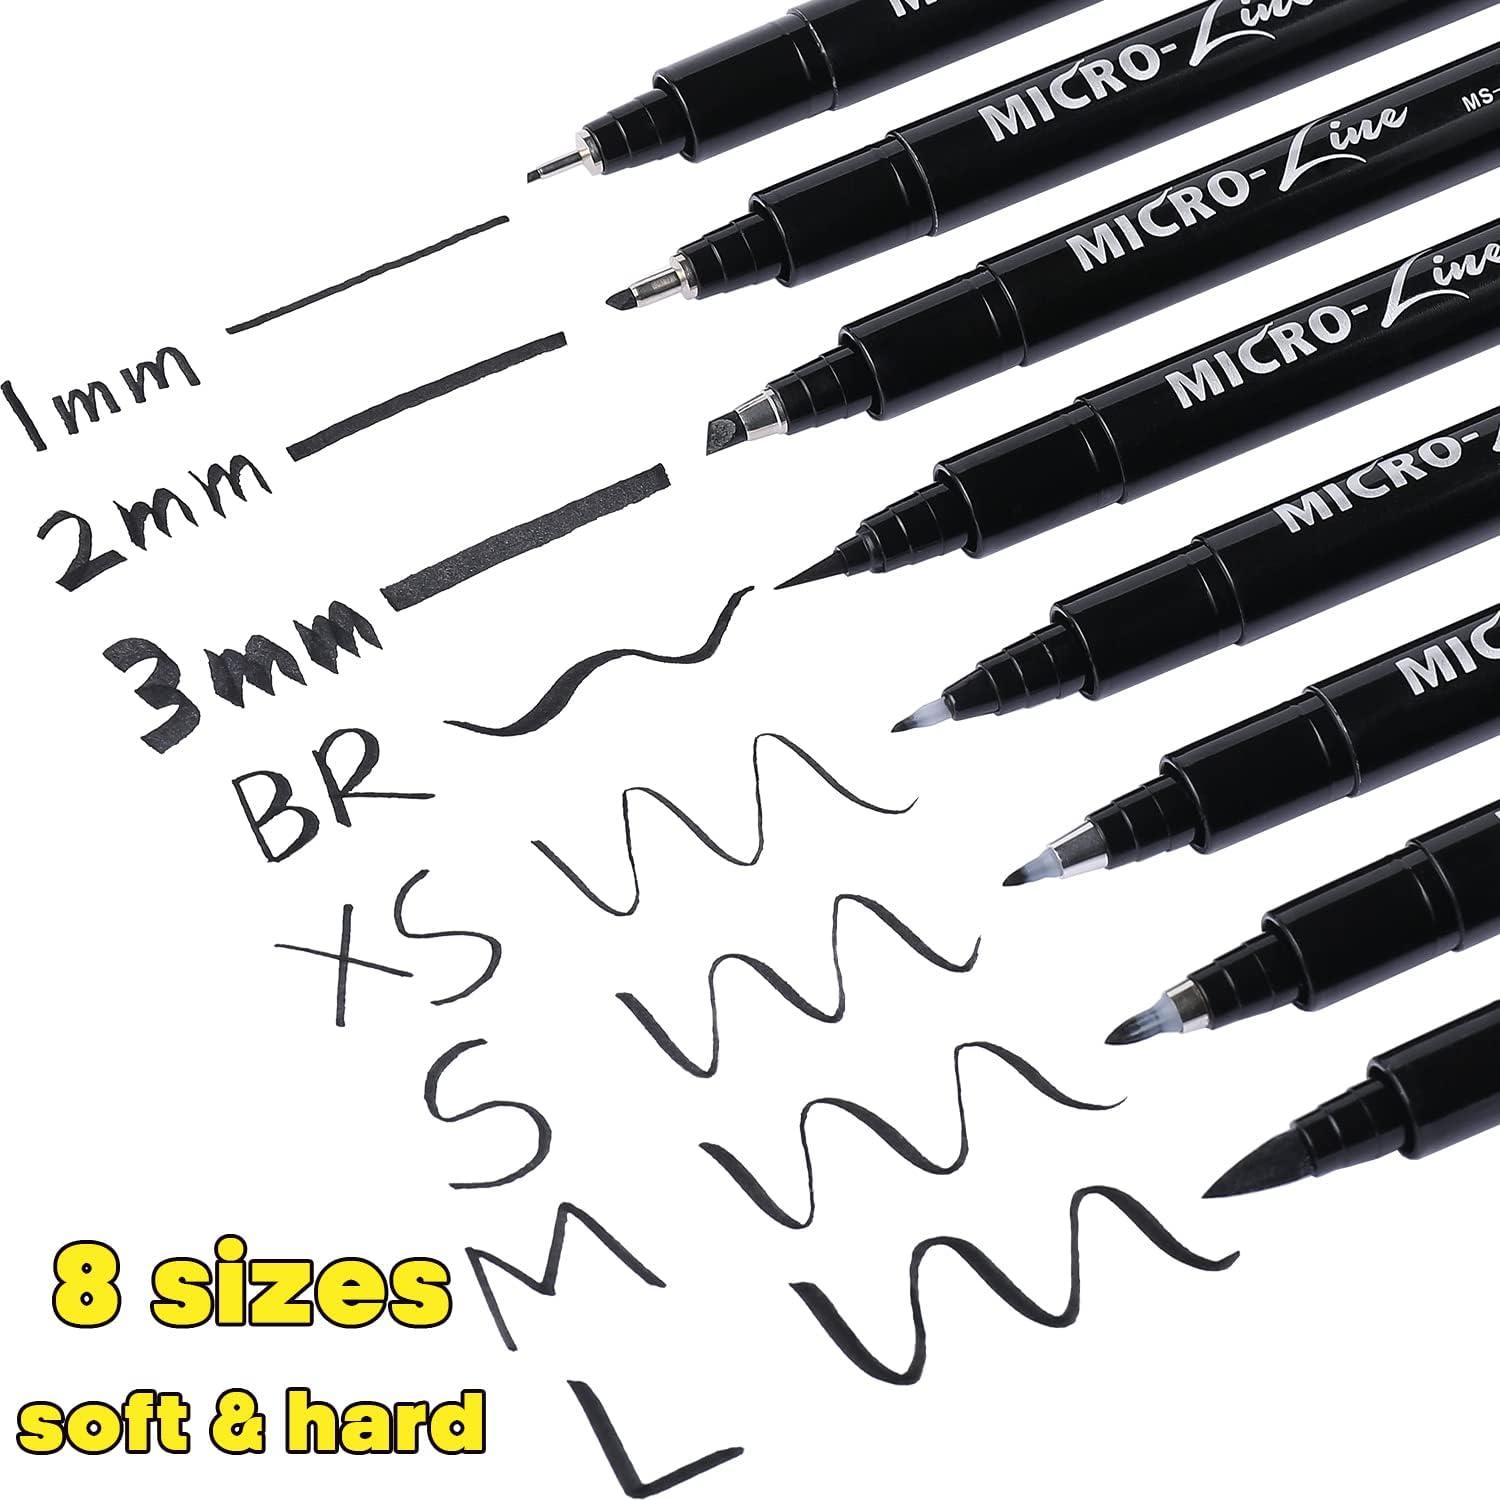 Jerry's Artarama Super Black Sketch Sets - Includes Fineliner Pen Set of 8 with A Professional Sketch Paper Pad - 9 inch x 12 inch, Size: 9 x 12